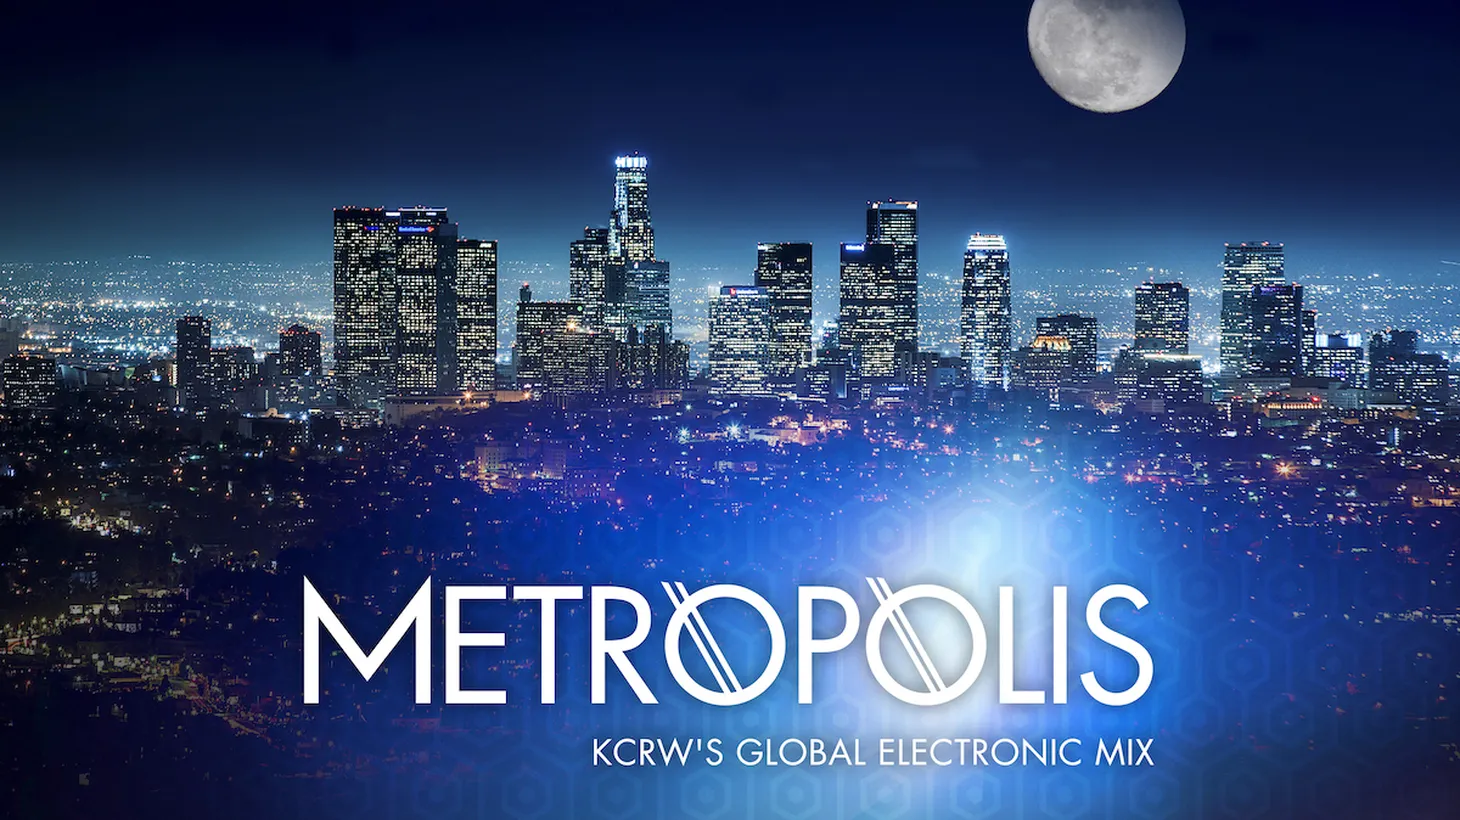 Local alternative dance luminaries The Crystal Method will stop by Metropolis in the 8 o'clock hour for an interview, and to debut a new mix compilation called Community Service (on sale July 23), featuring new songs and remixes by The Crystal Method themselves.